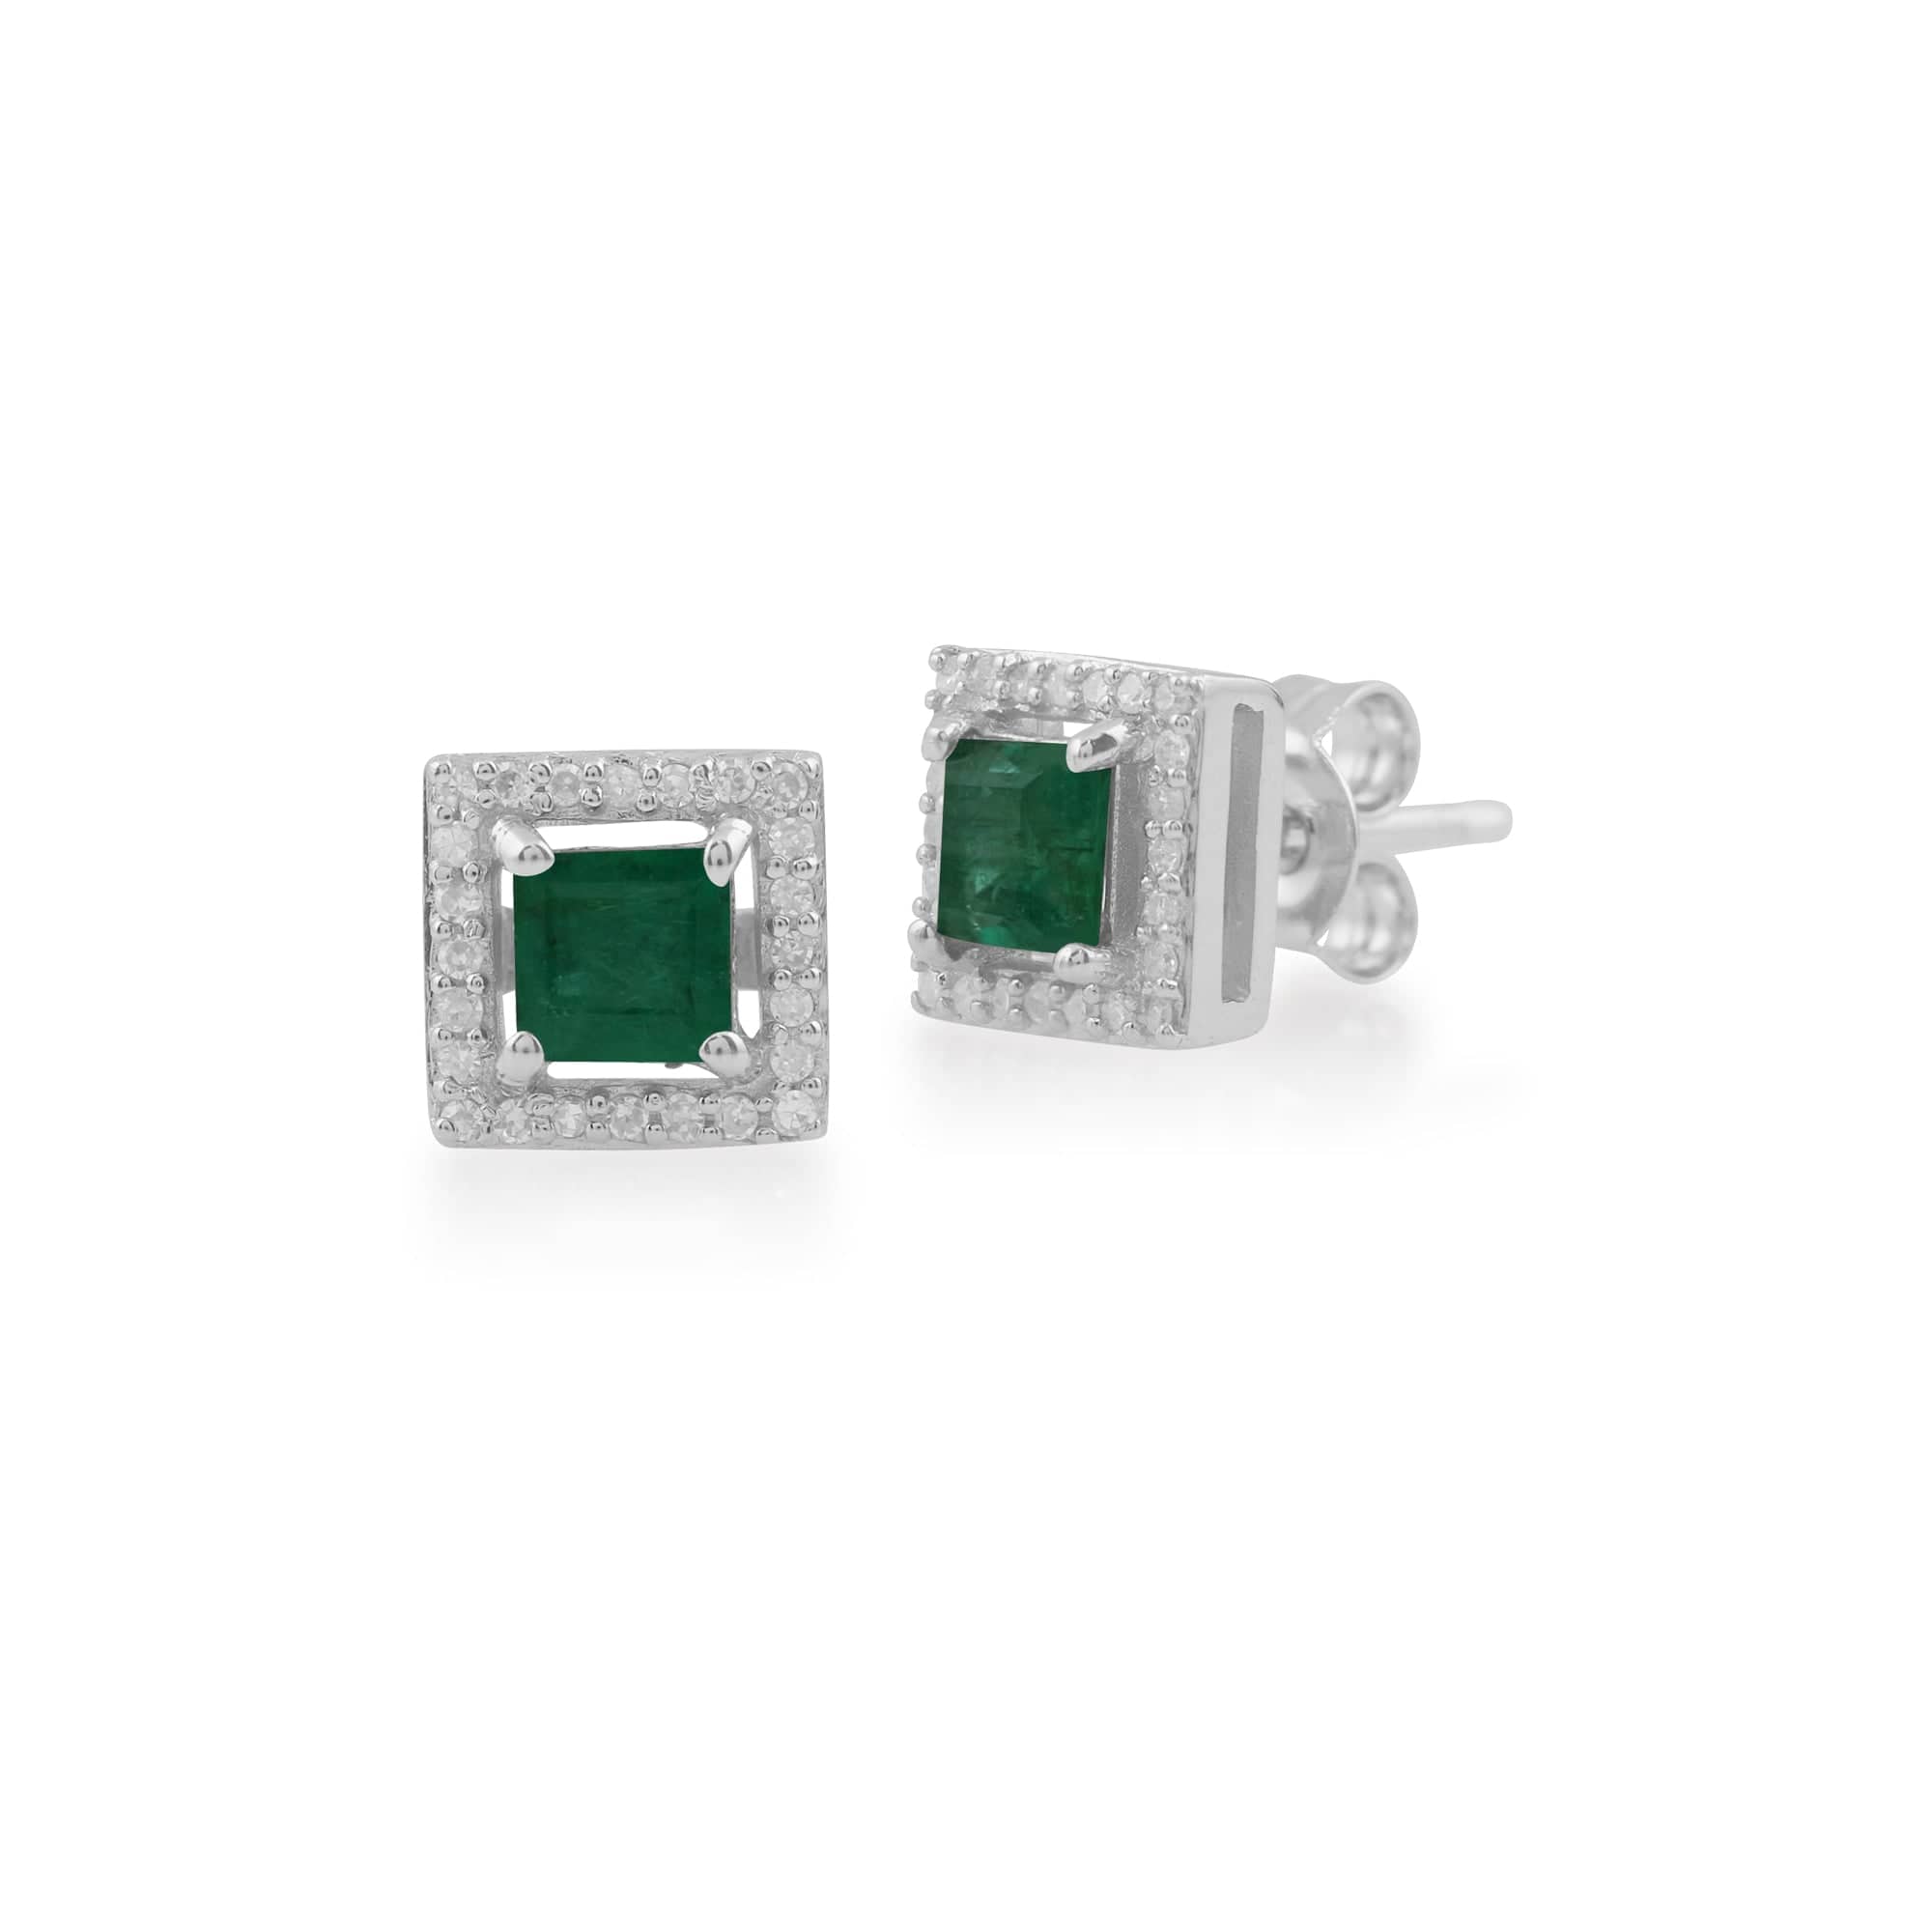 Gemondo Square Emerald & Diamond Cluster Luxe Stud Earrings In 9ct White Gold